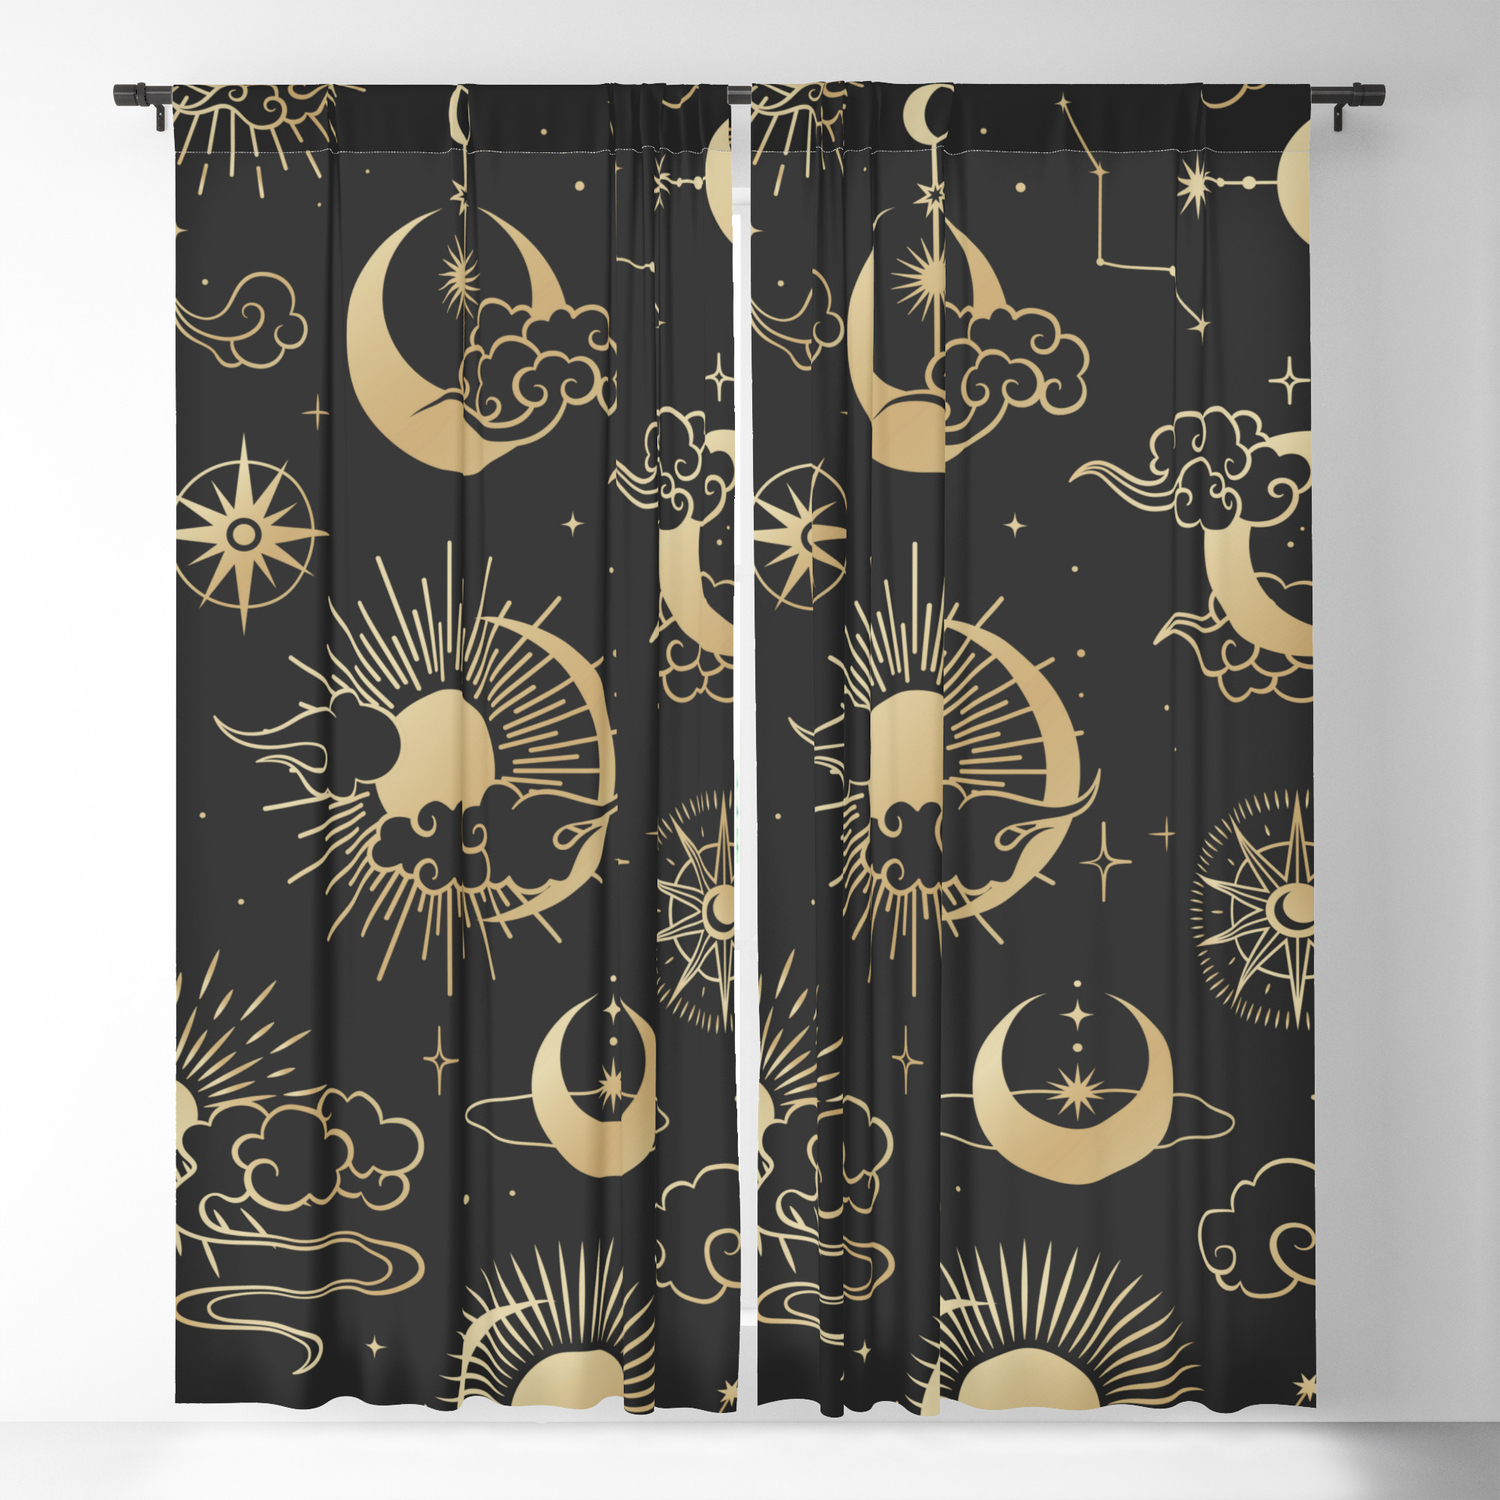 SUN AND MOON BLACK GOLD 66" x 72" PENCIL PLEAT CURTAINS & MATCHING TIE BACKS 